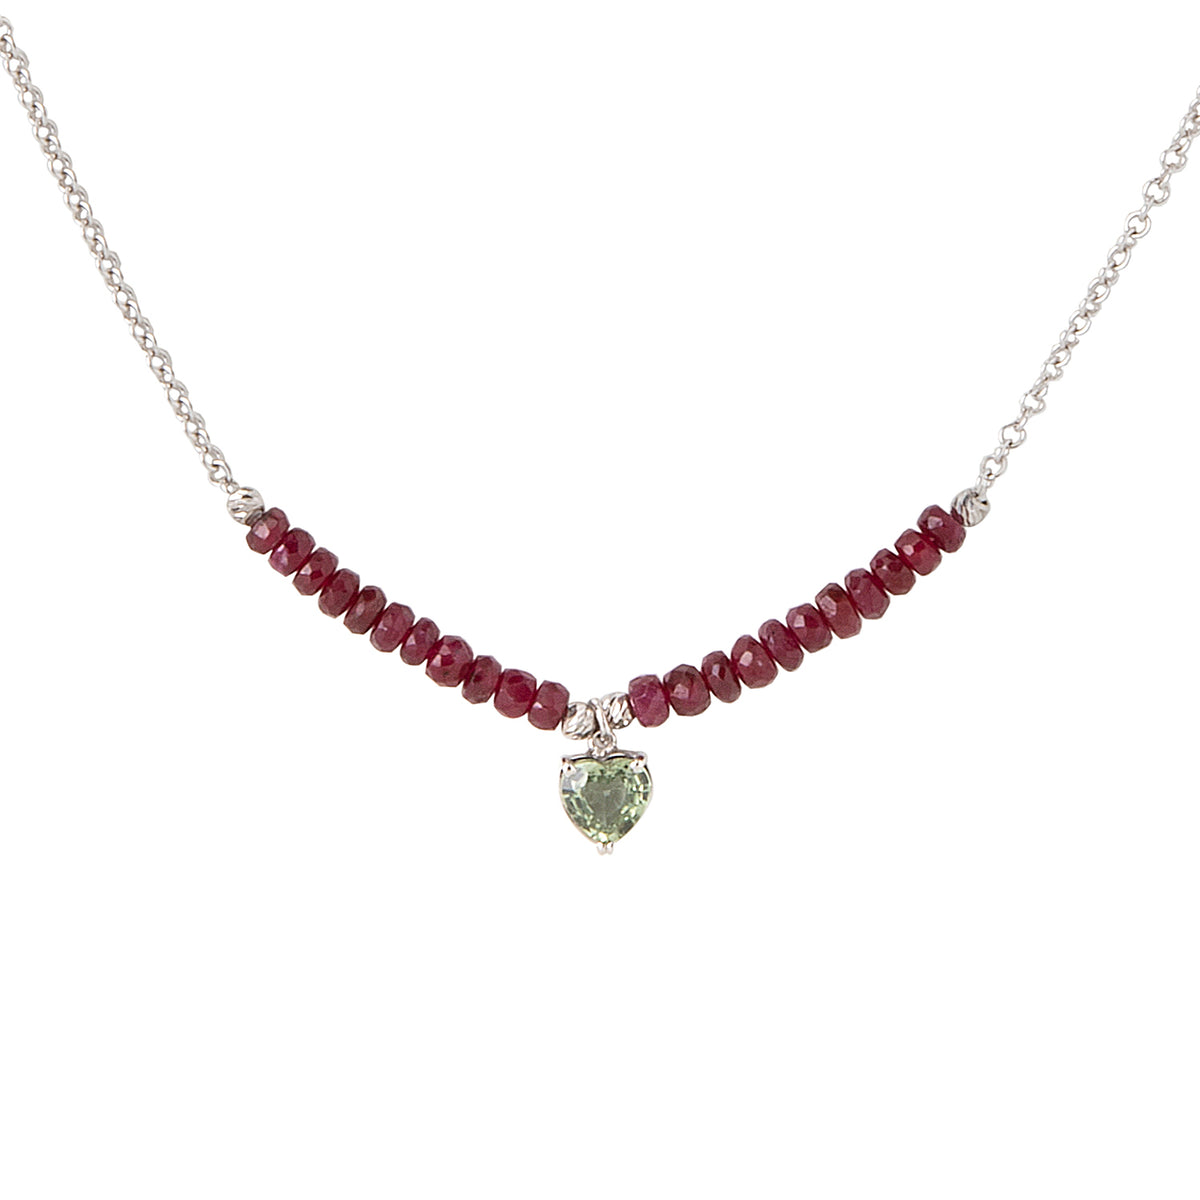 Green Sapphire and Ruby beads necklace 